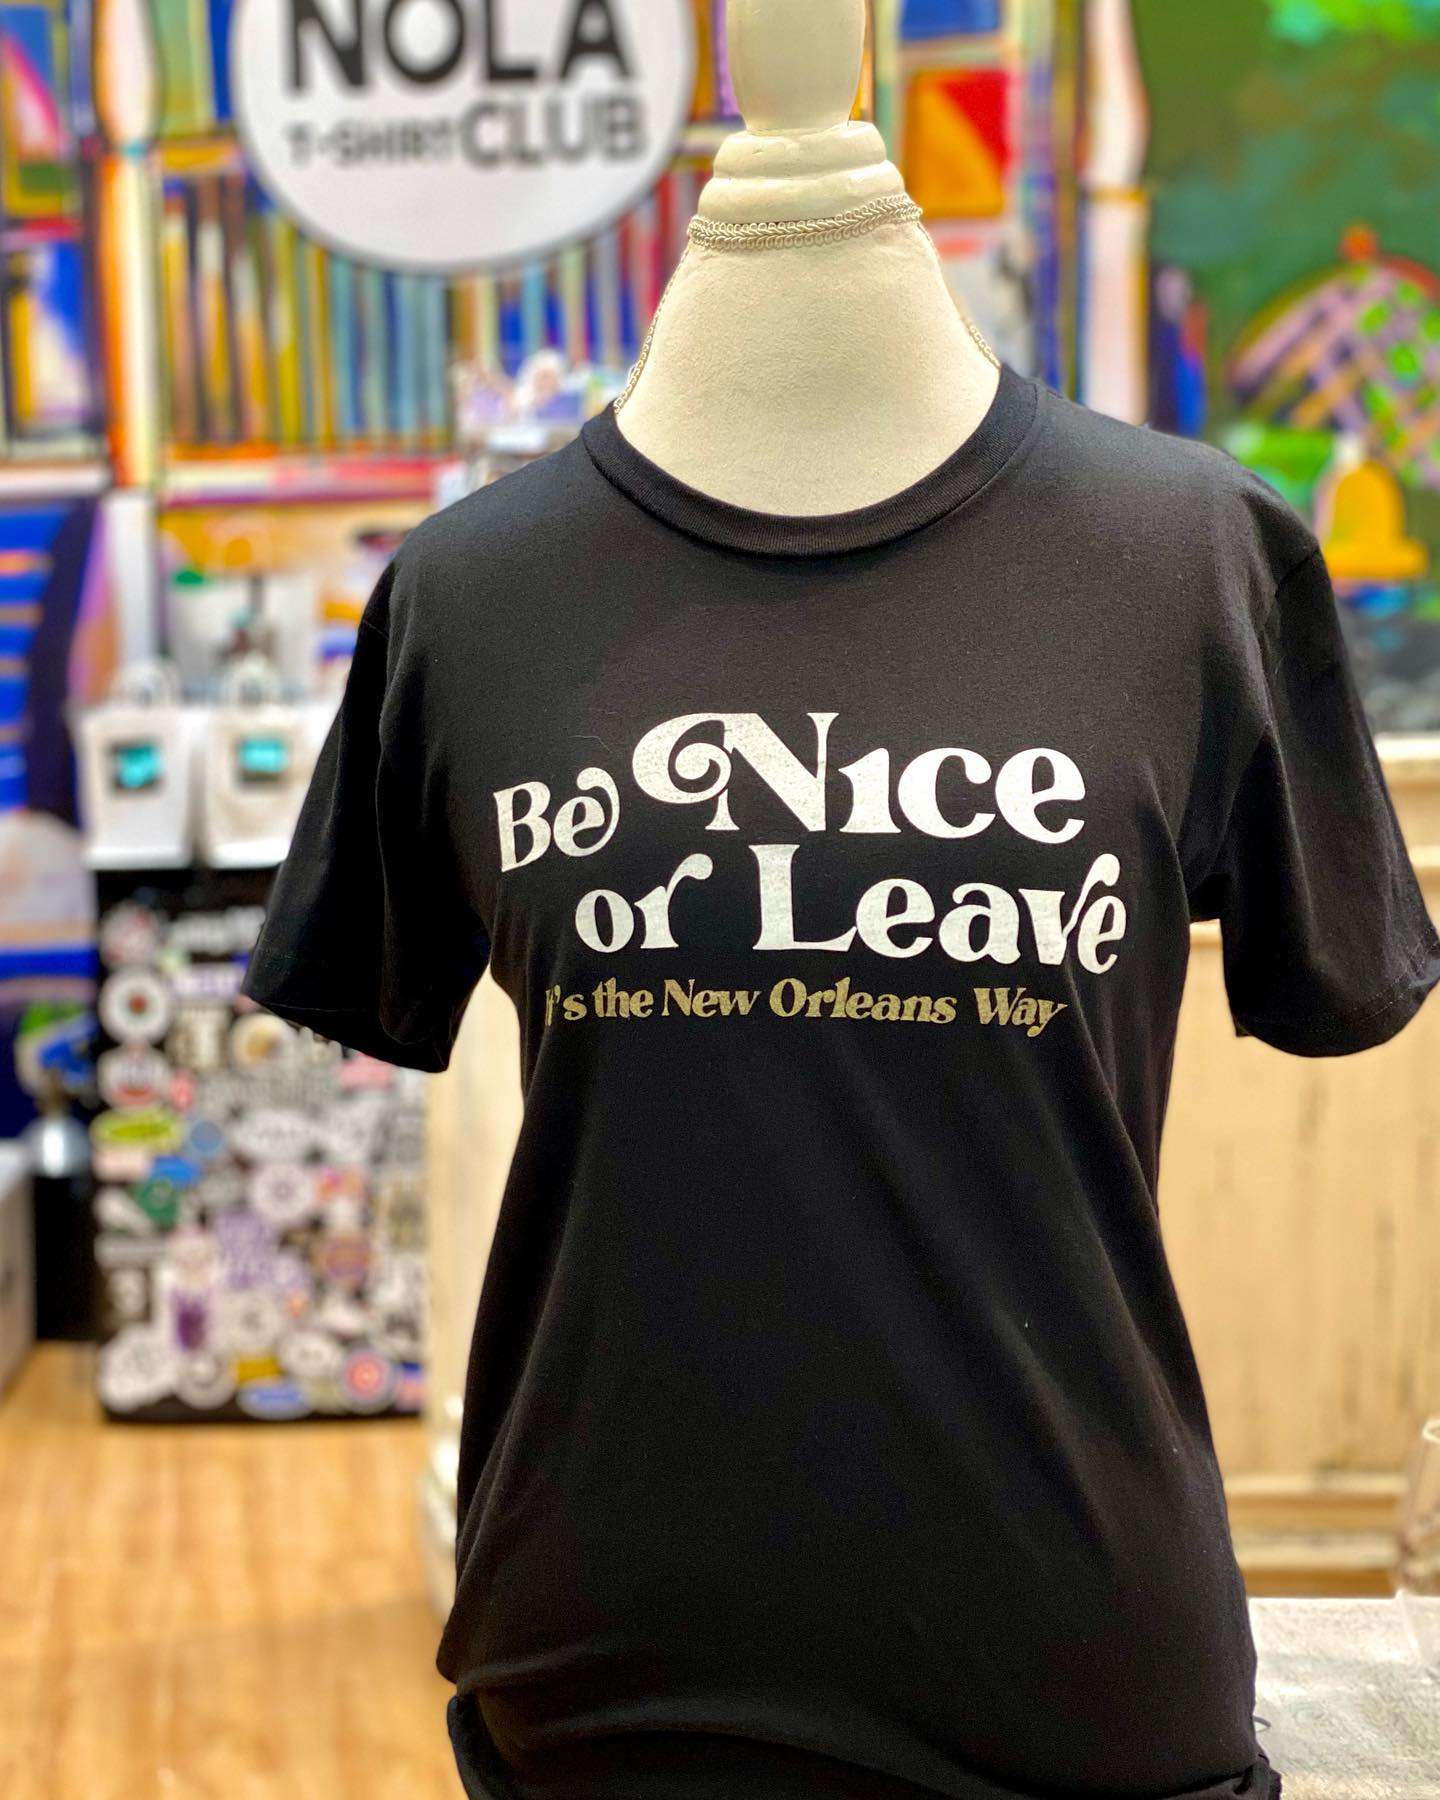 Be nice or leave - It's the New Orleans way, be nice in New Orleans